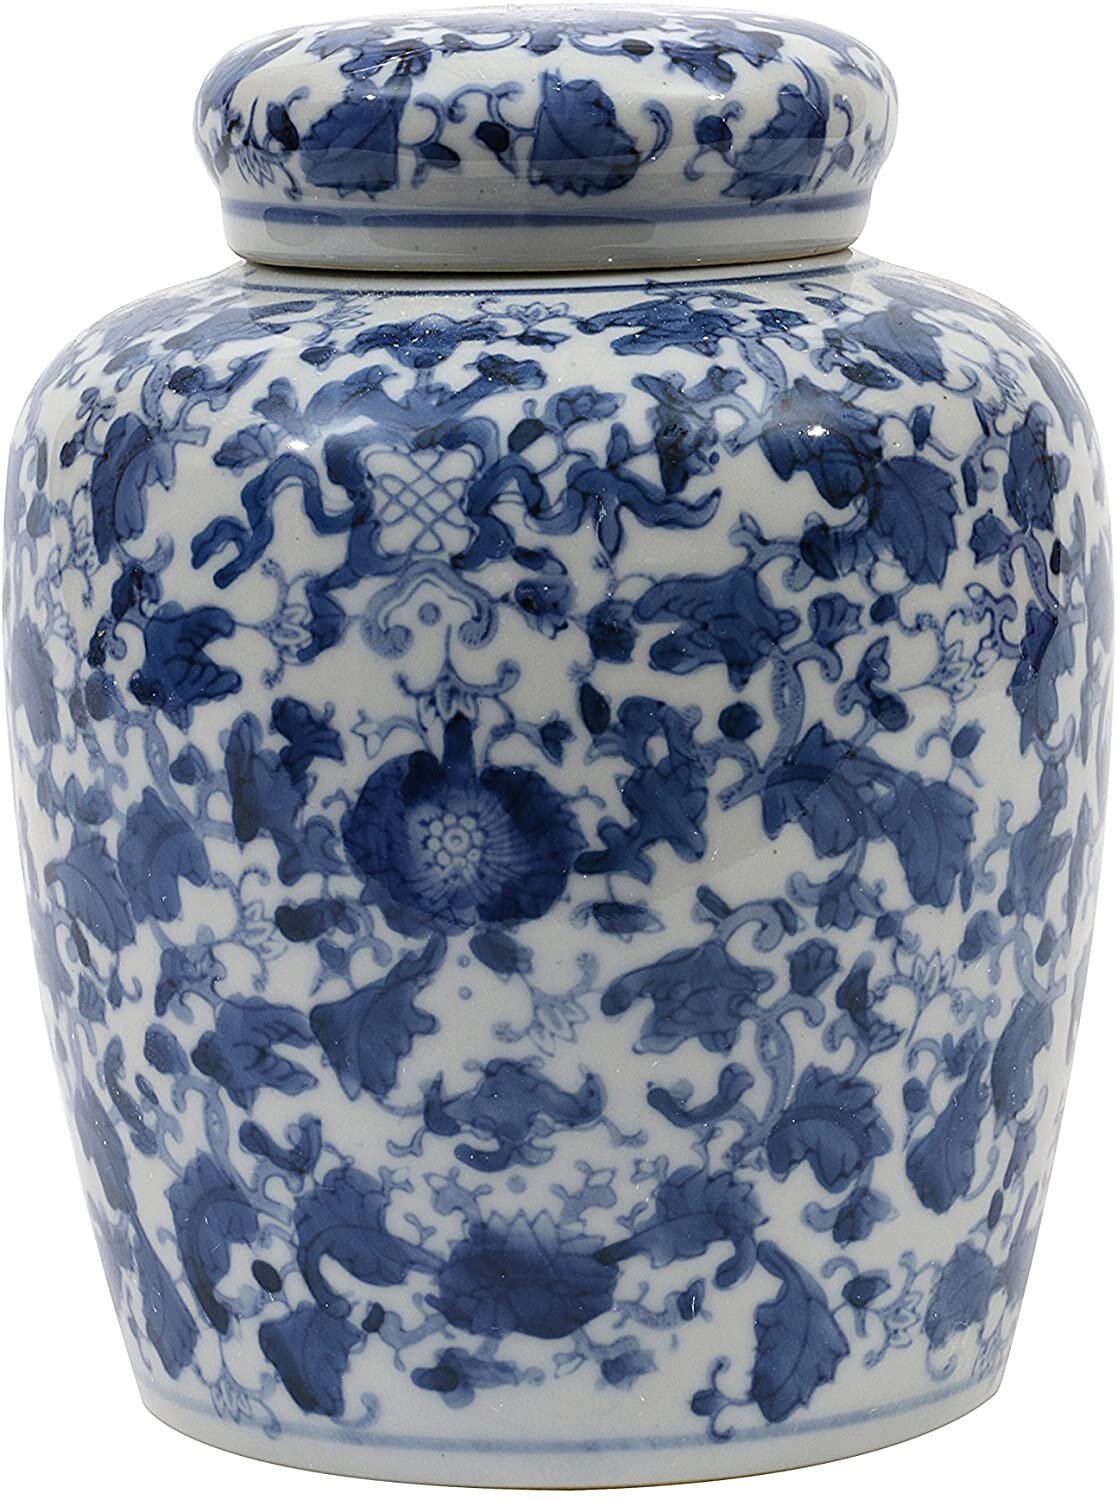 Creative Co-op Decorative Blue and White Ceramic Ginger Jar with Lid, Large - Amazon.jpg